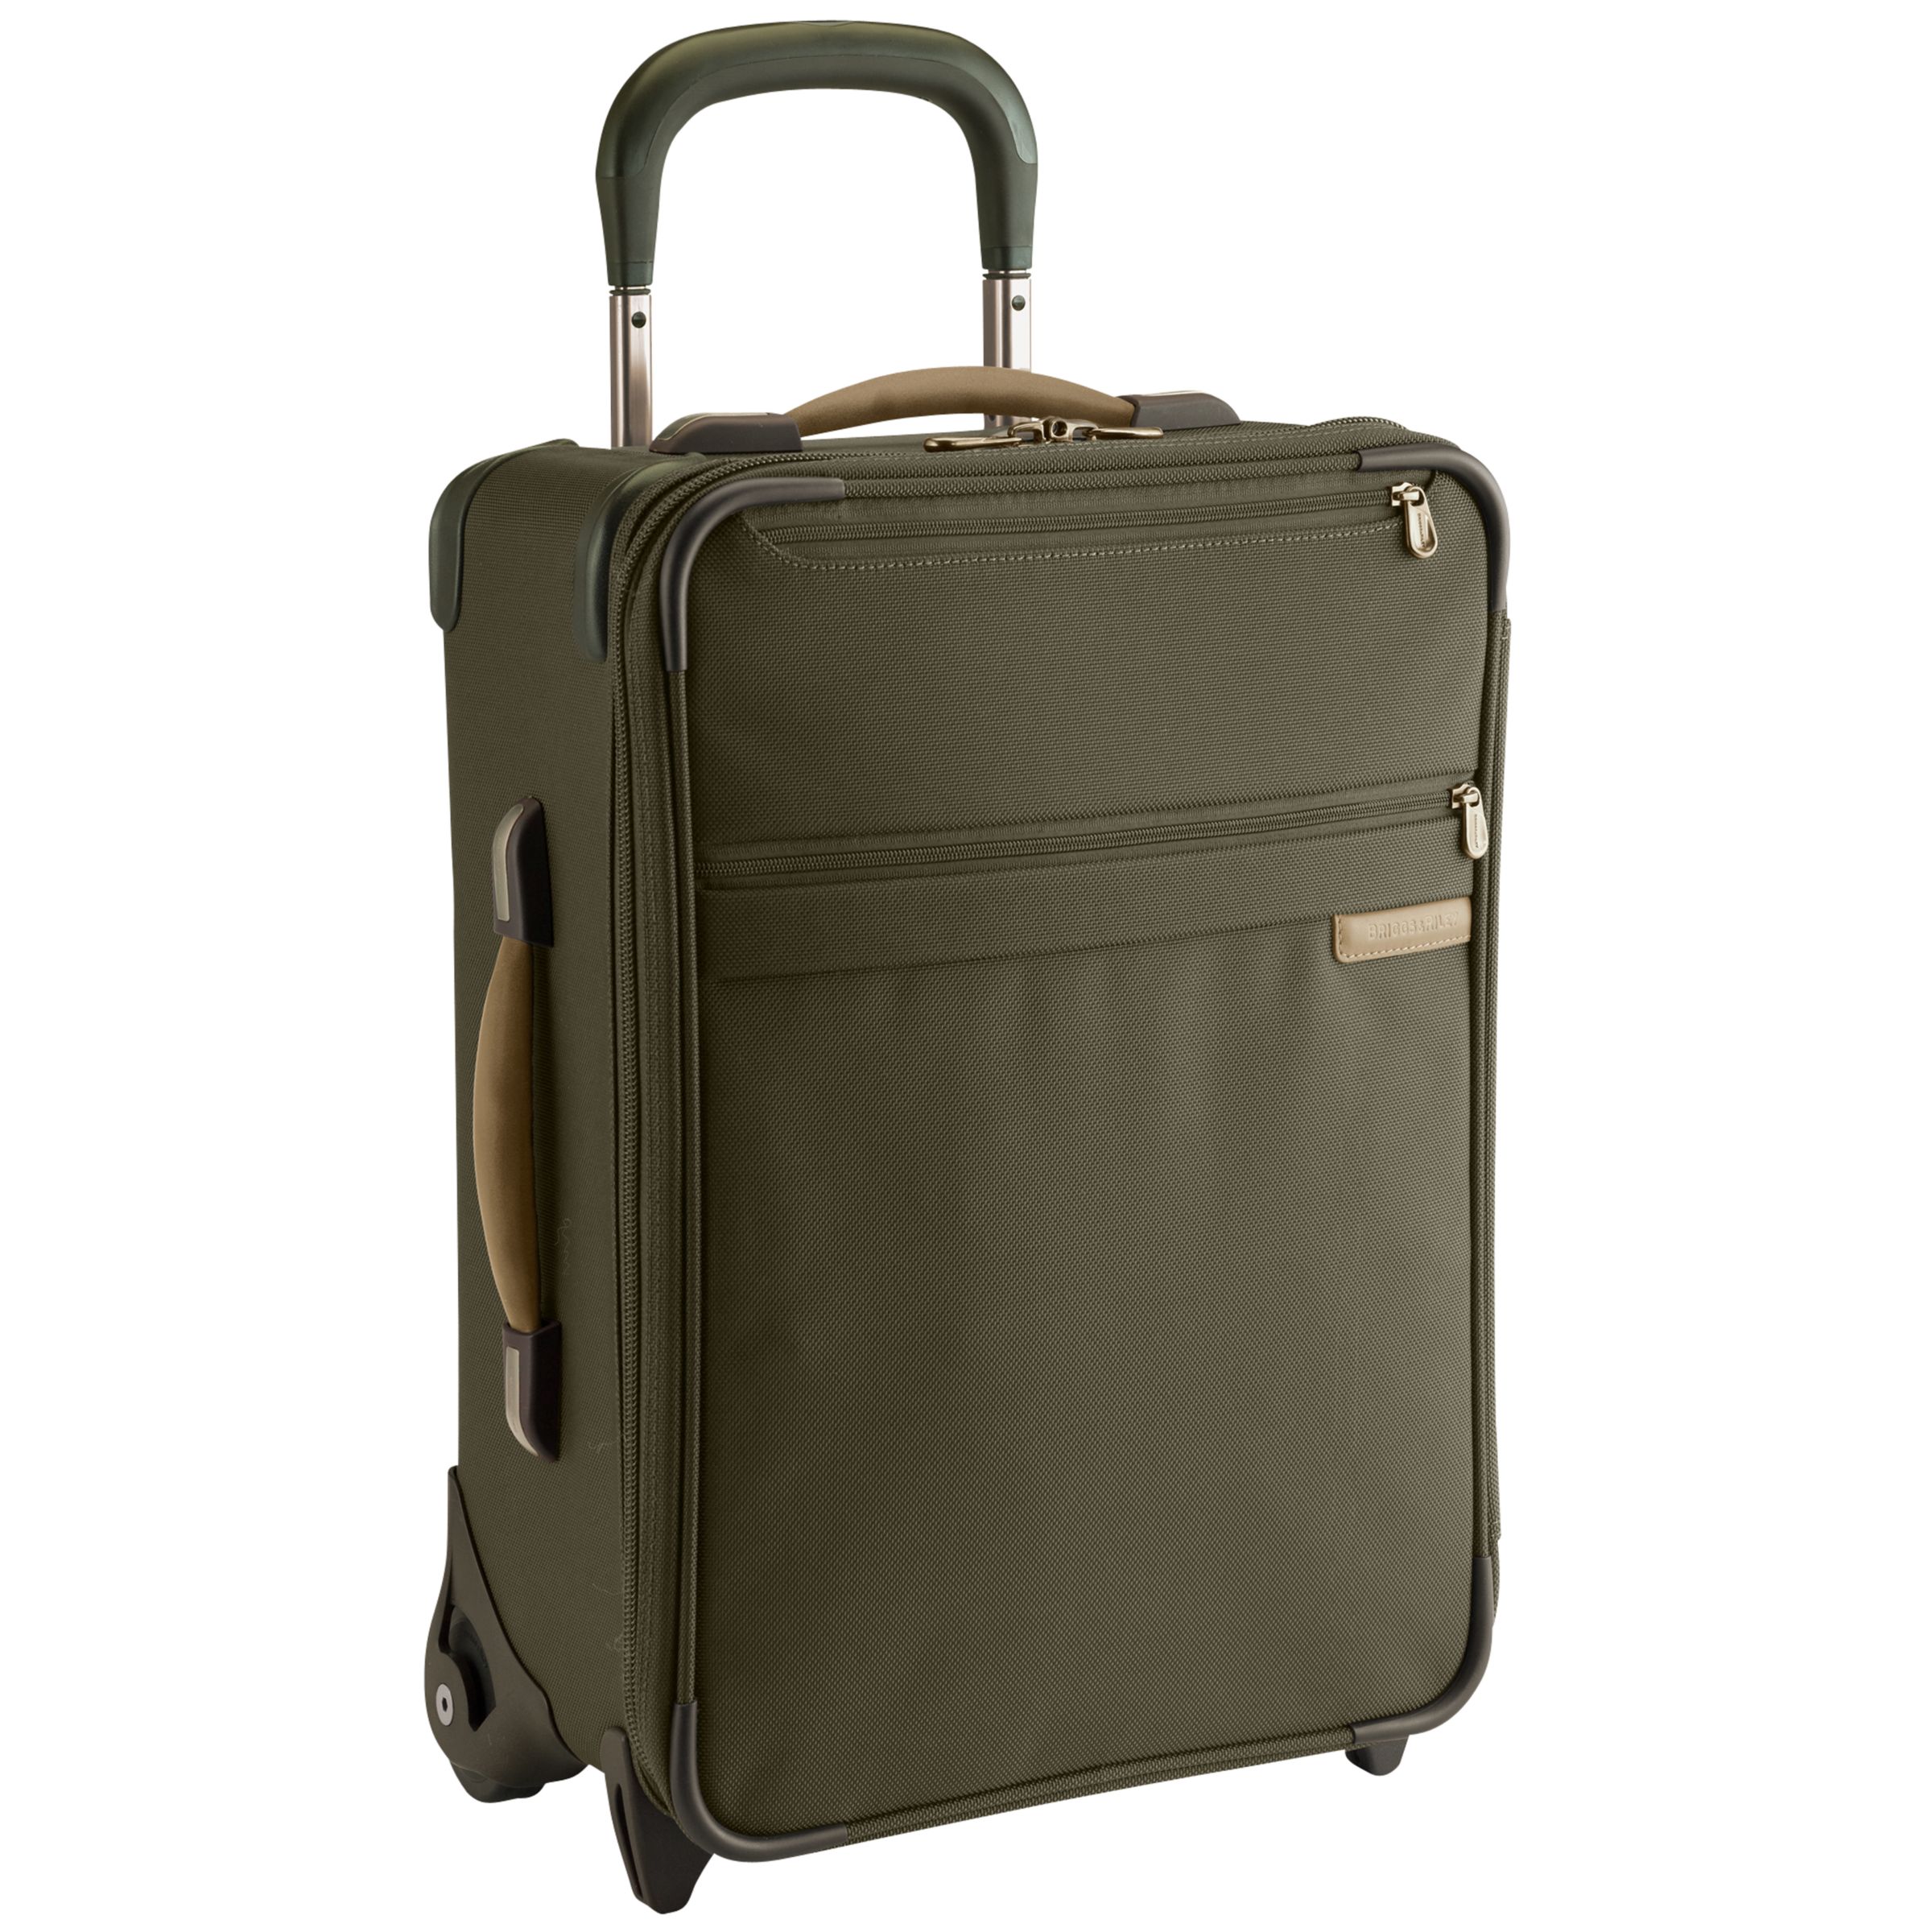 Briggs & Riley 20'' Superlight Upright Trolley Case, Olive at John Lewis